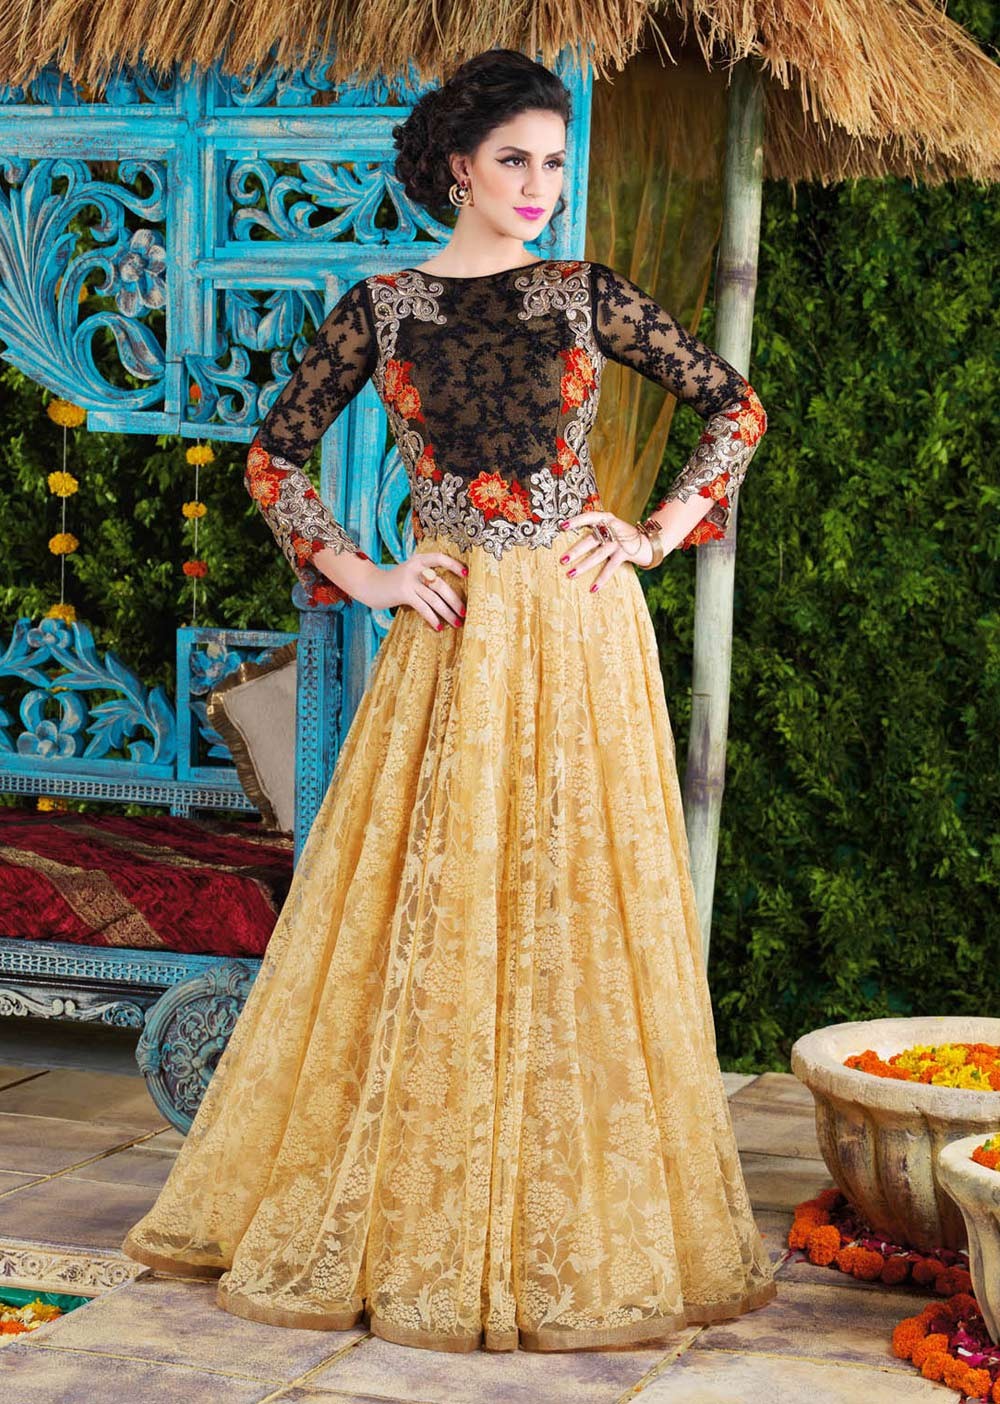 Indian Wedding Dresses and Wedding Gowns for online Get Now – Desihault